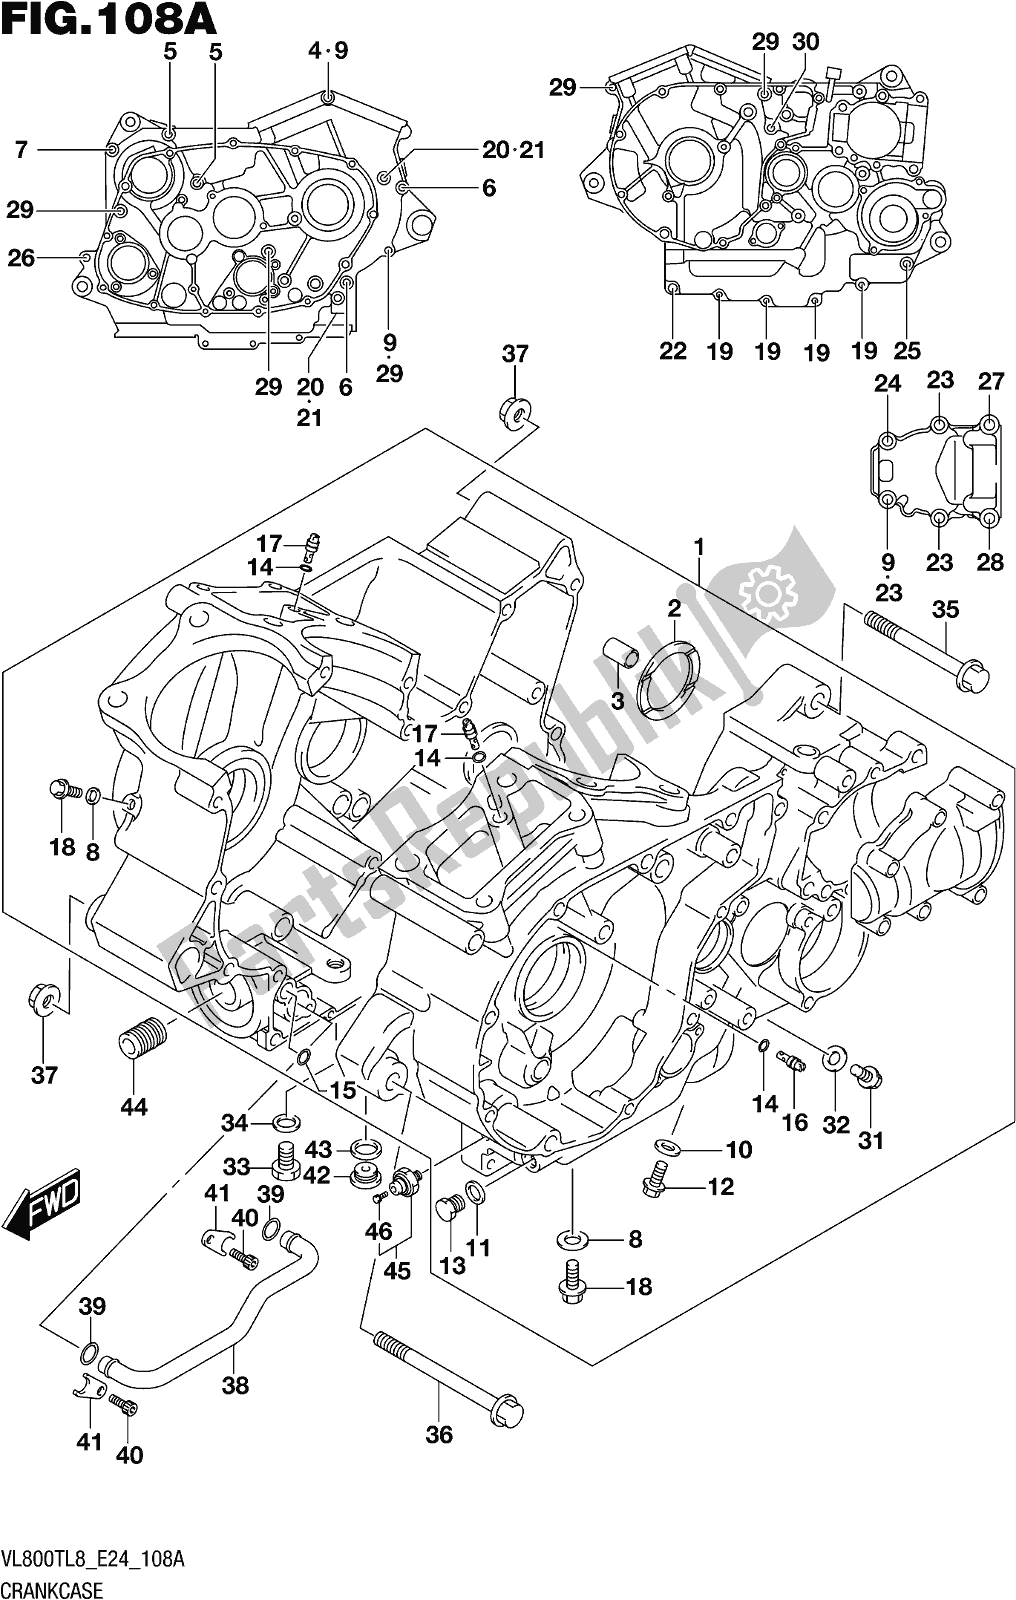 All parts for the Fig. 108a Crankcase of the Suzuki VL 800T 2018